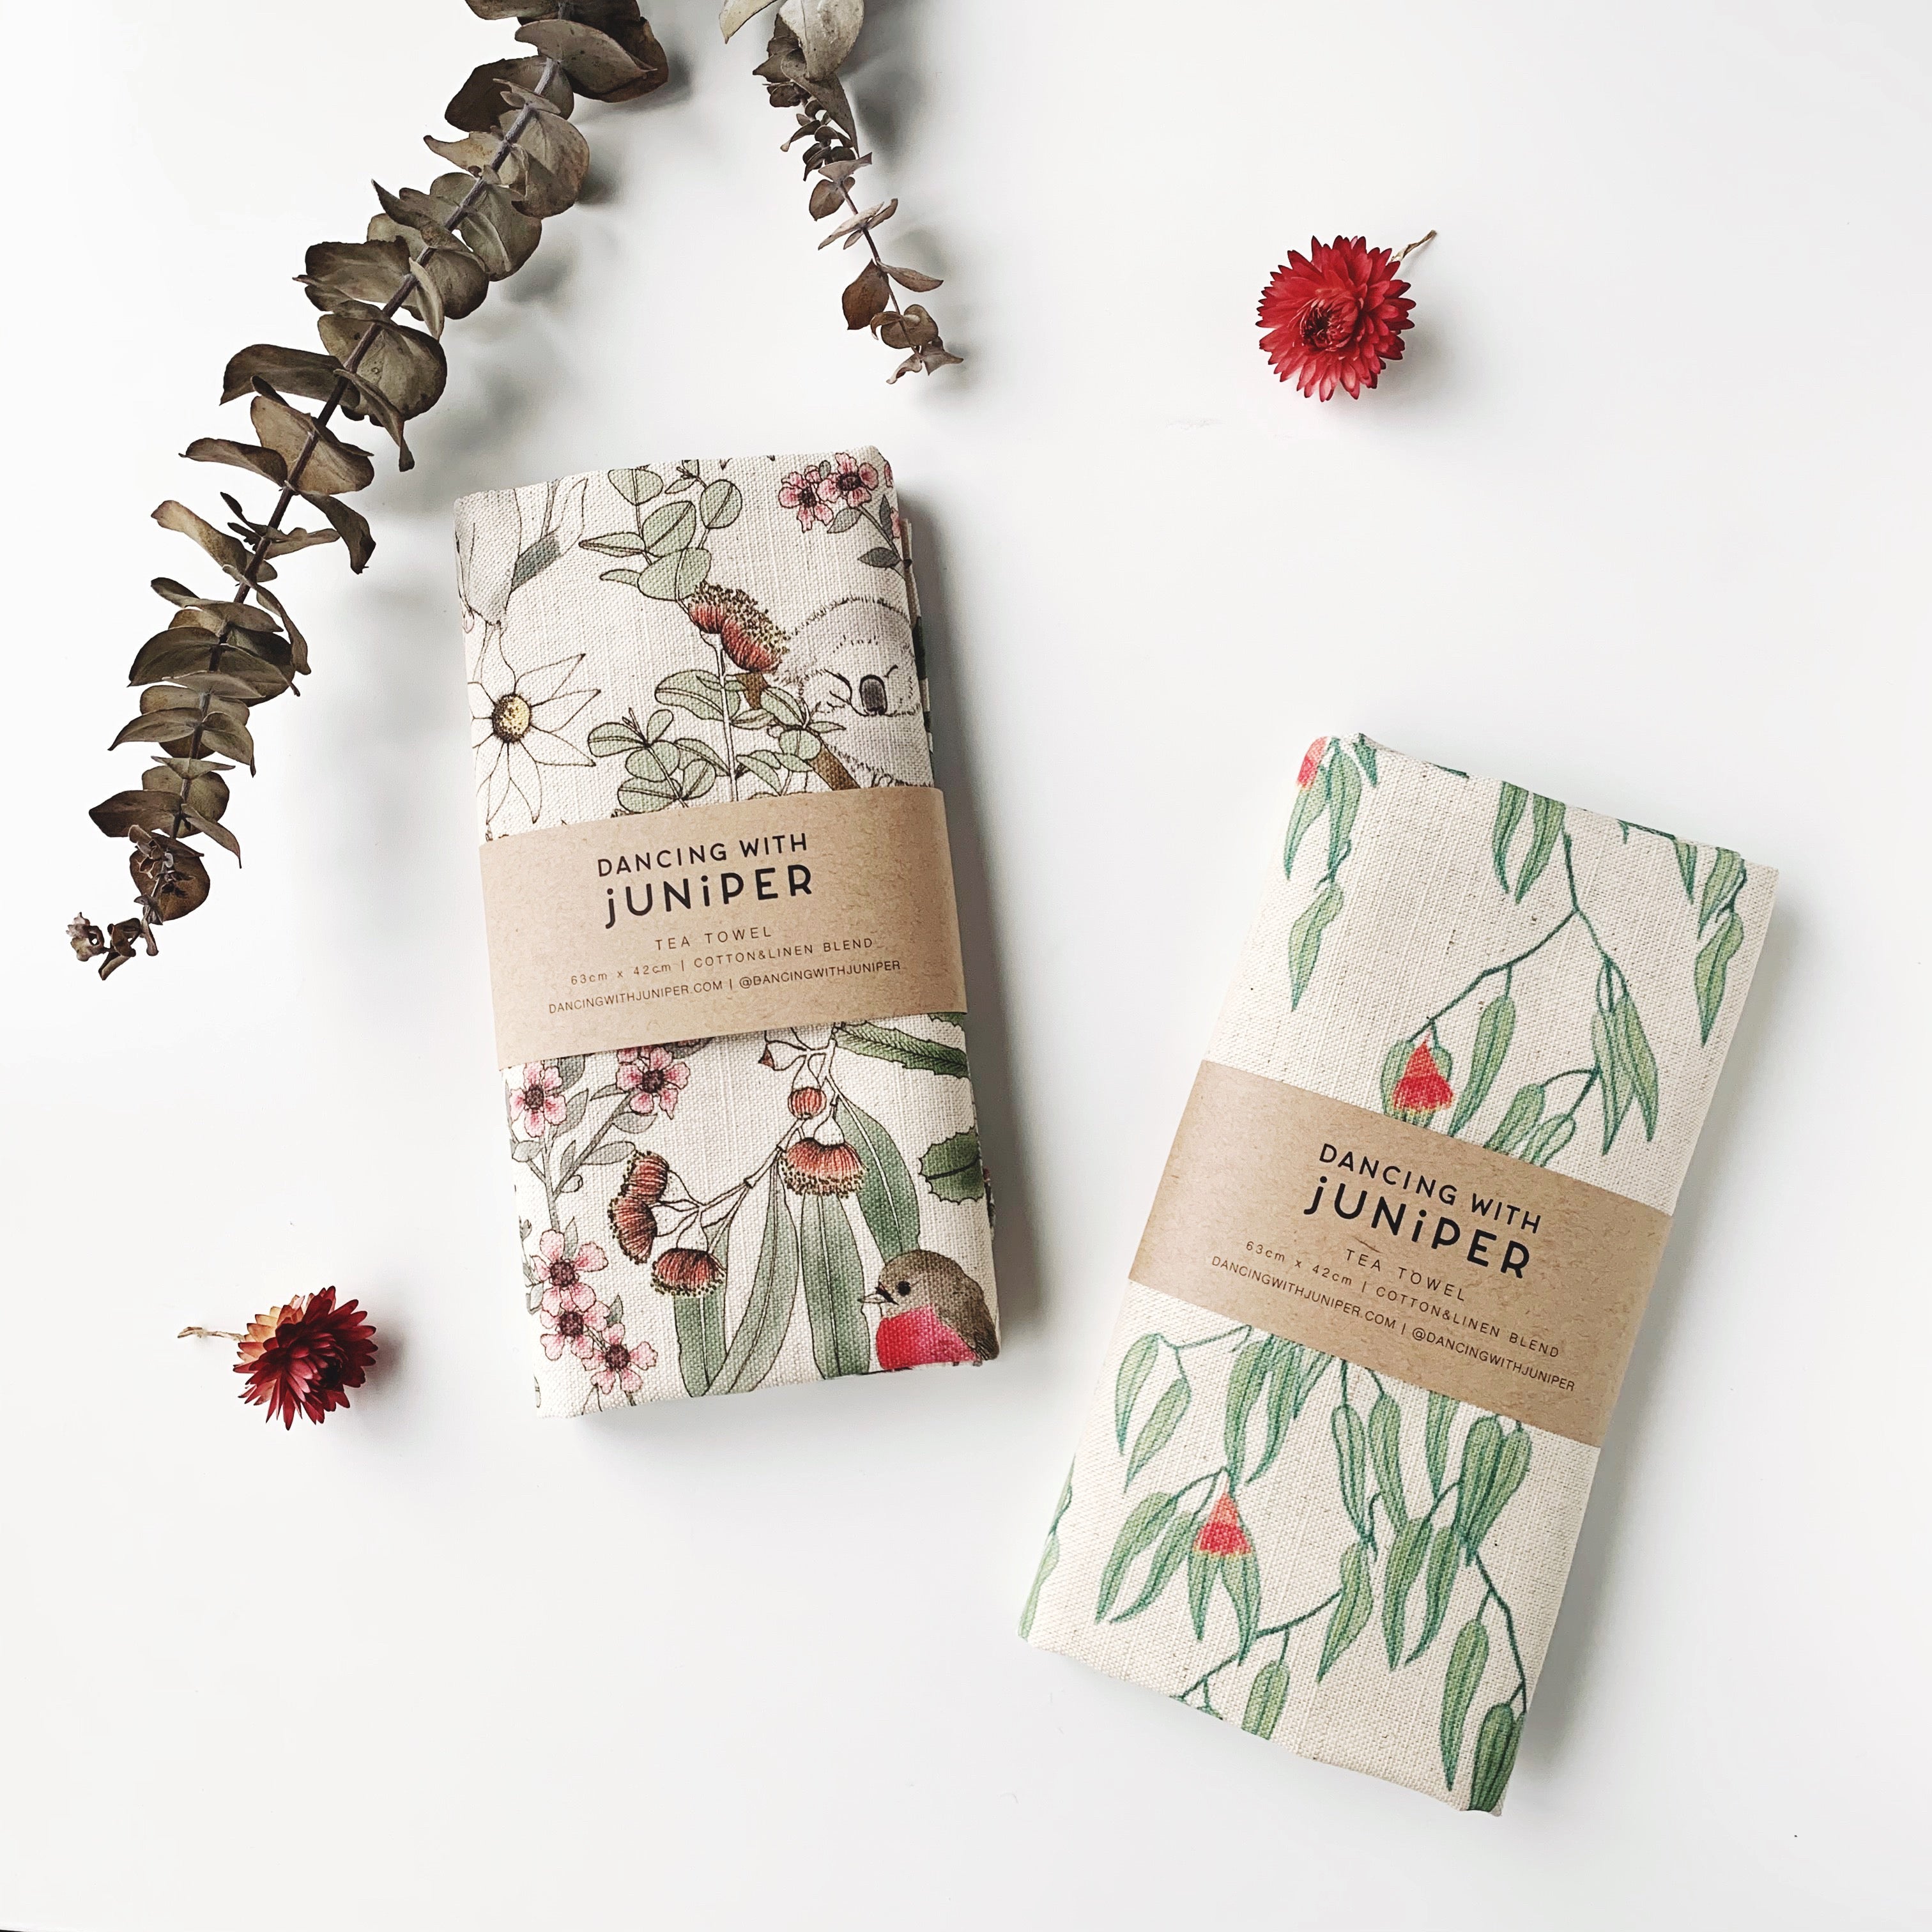 Gorgeous Gifts - Dancing with juniper